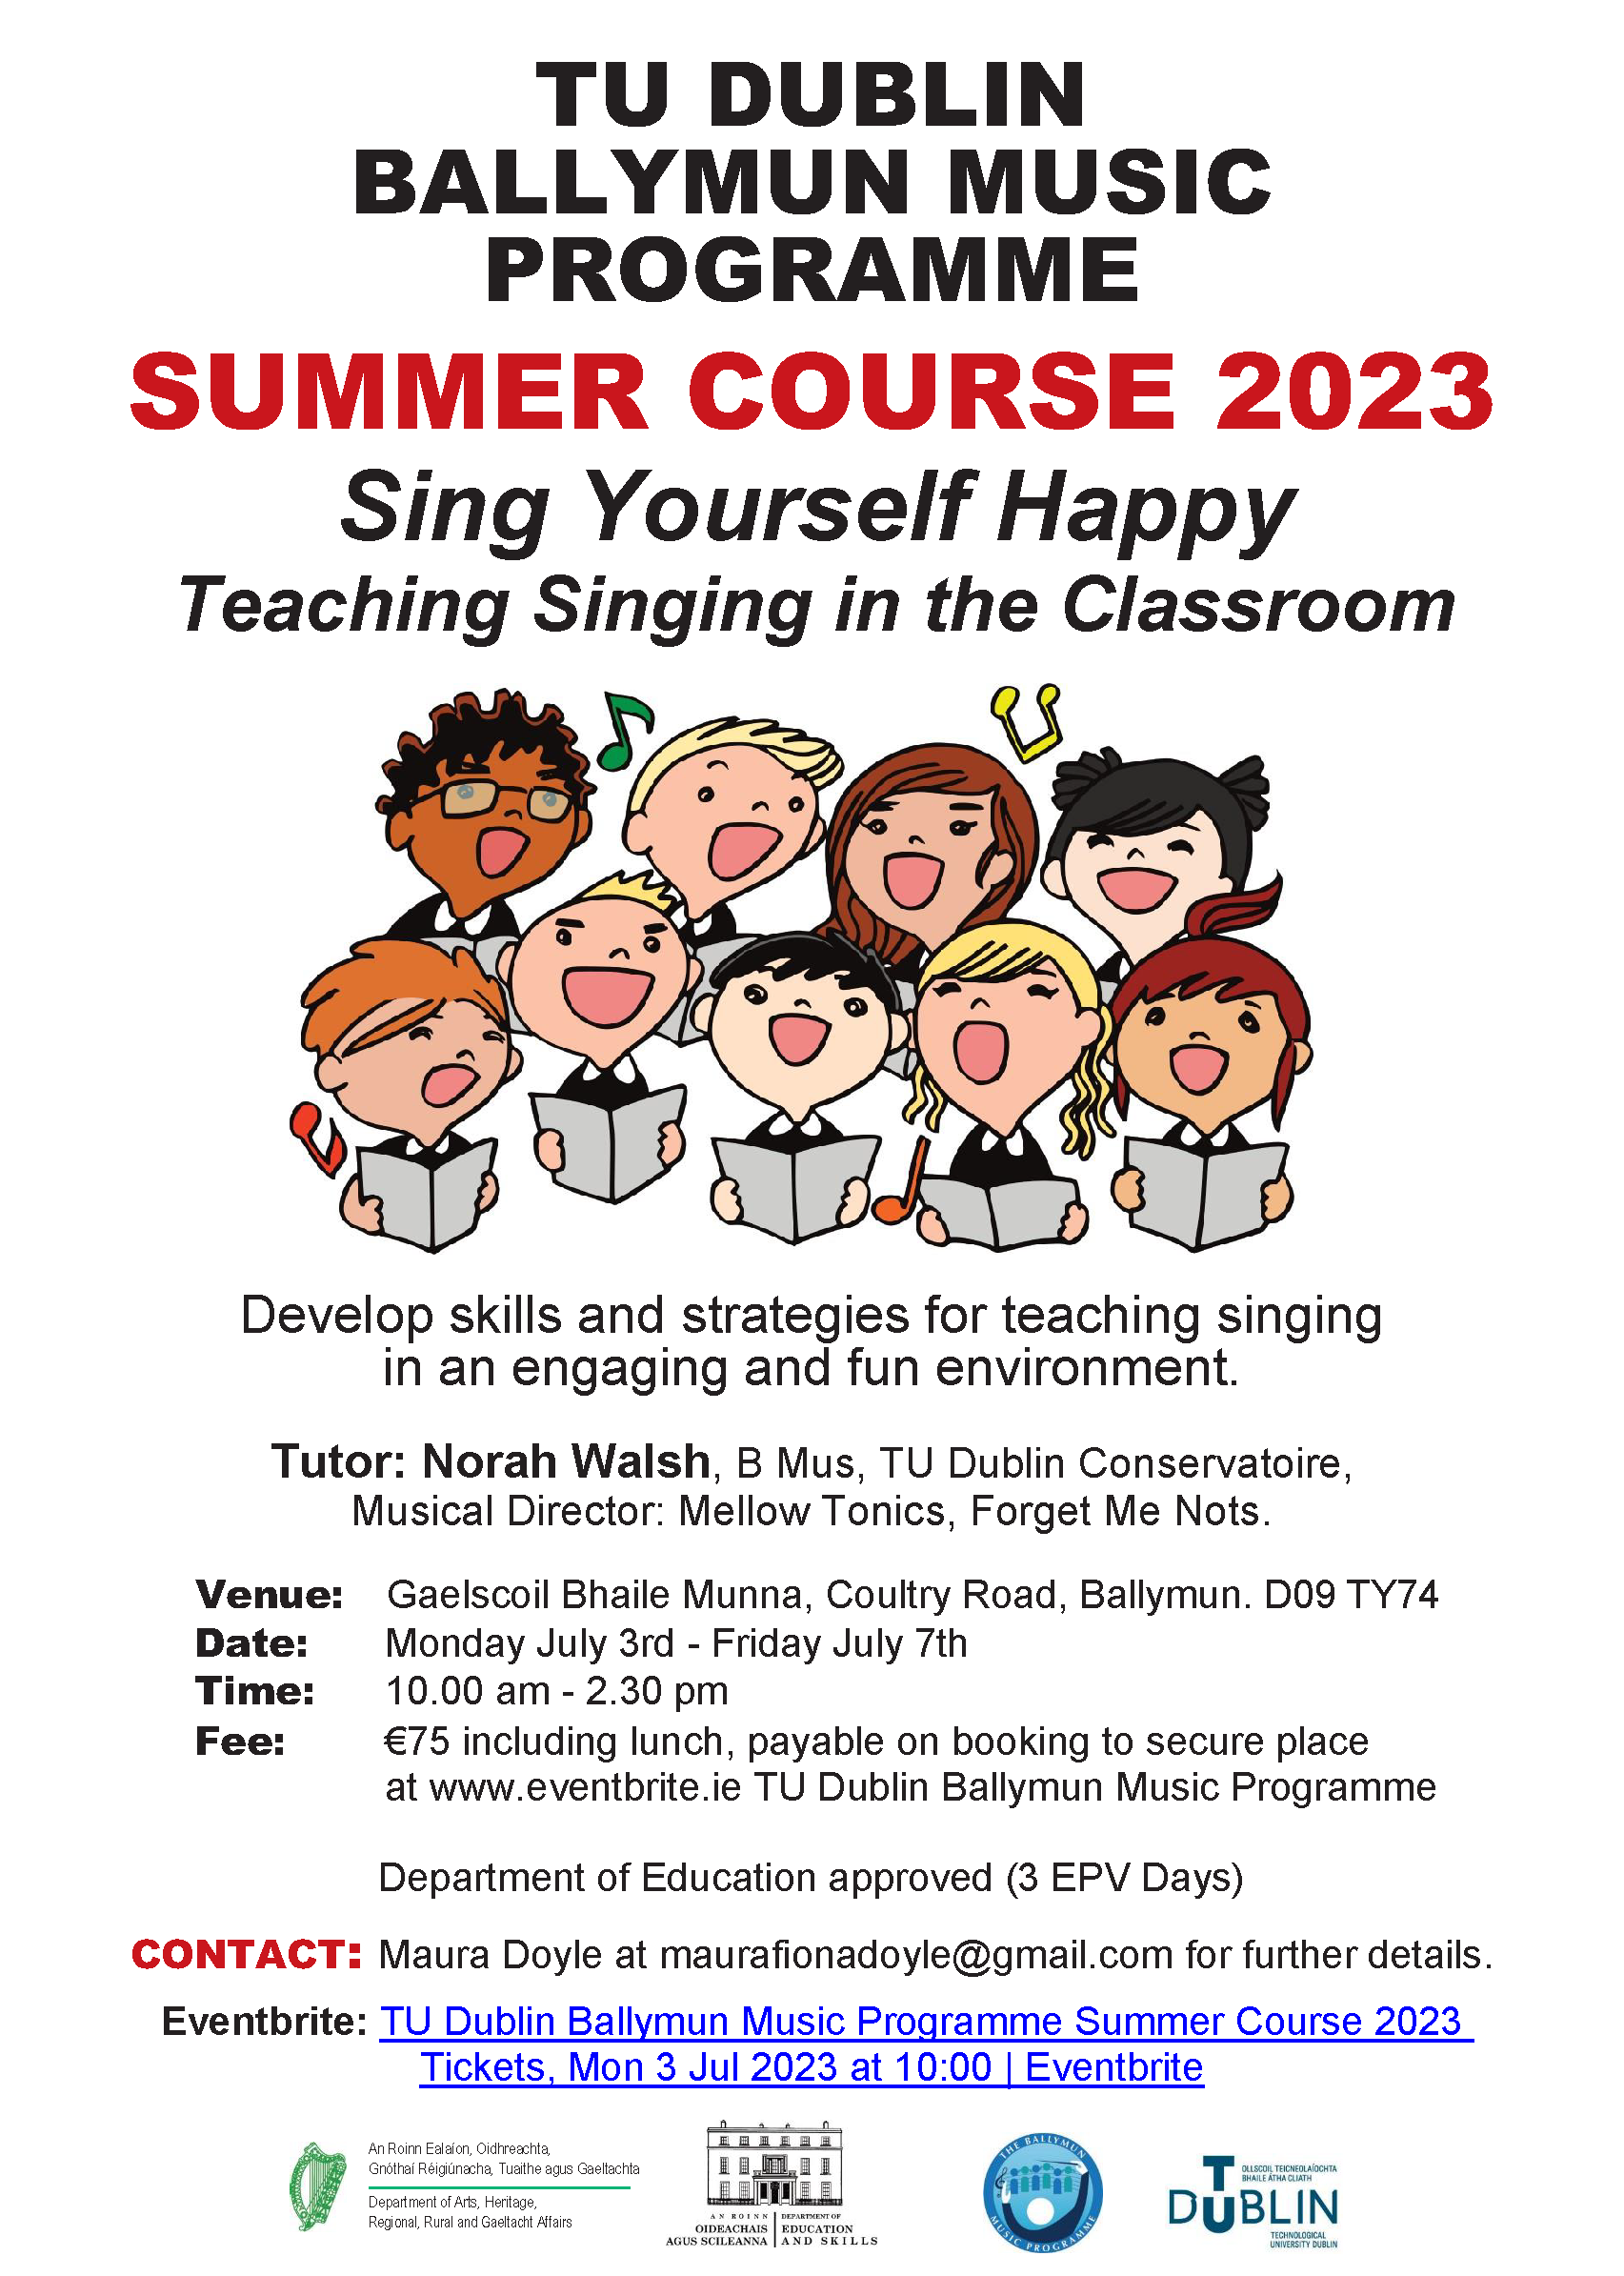 Sing Yourself Happy - Teaching Singing in the Classroom